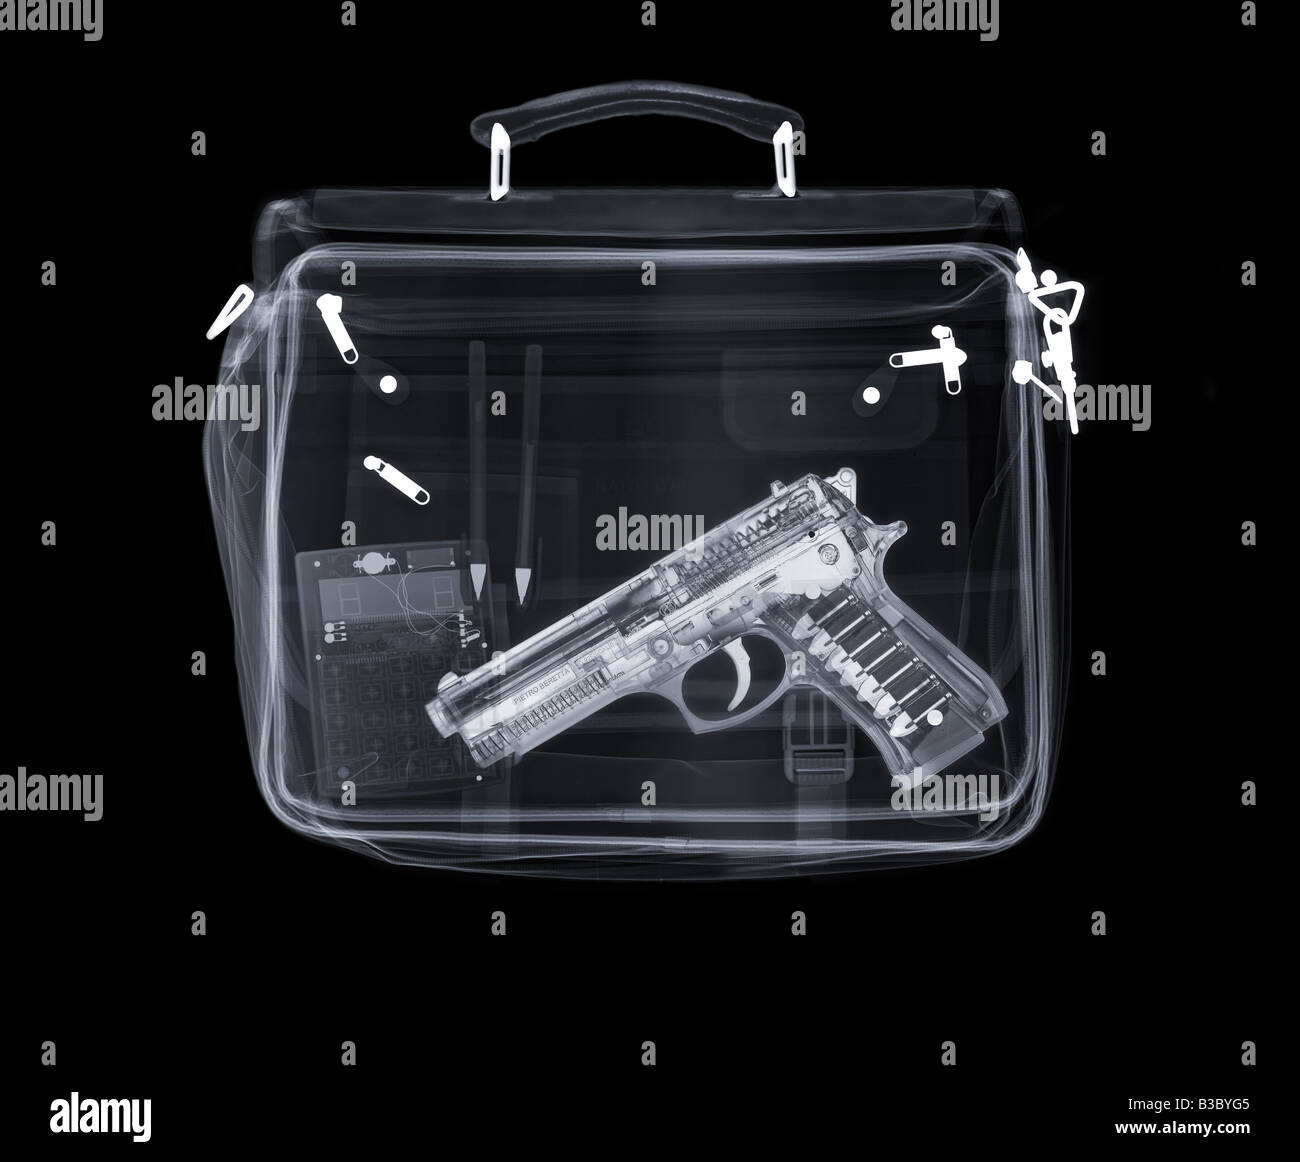 X-ray of a bag containing a gun, pens and a calculator Stock Photo - Alamy